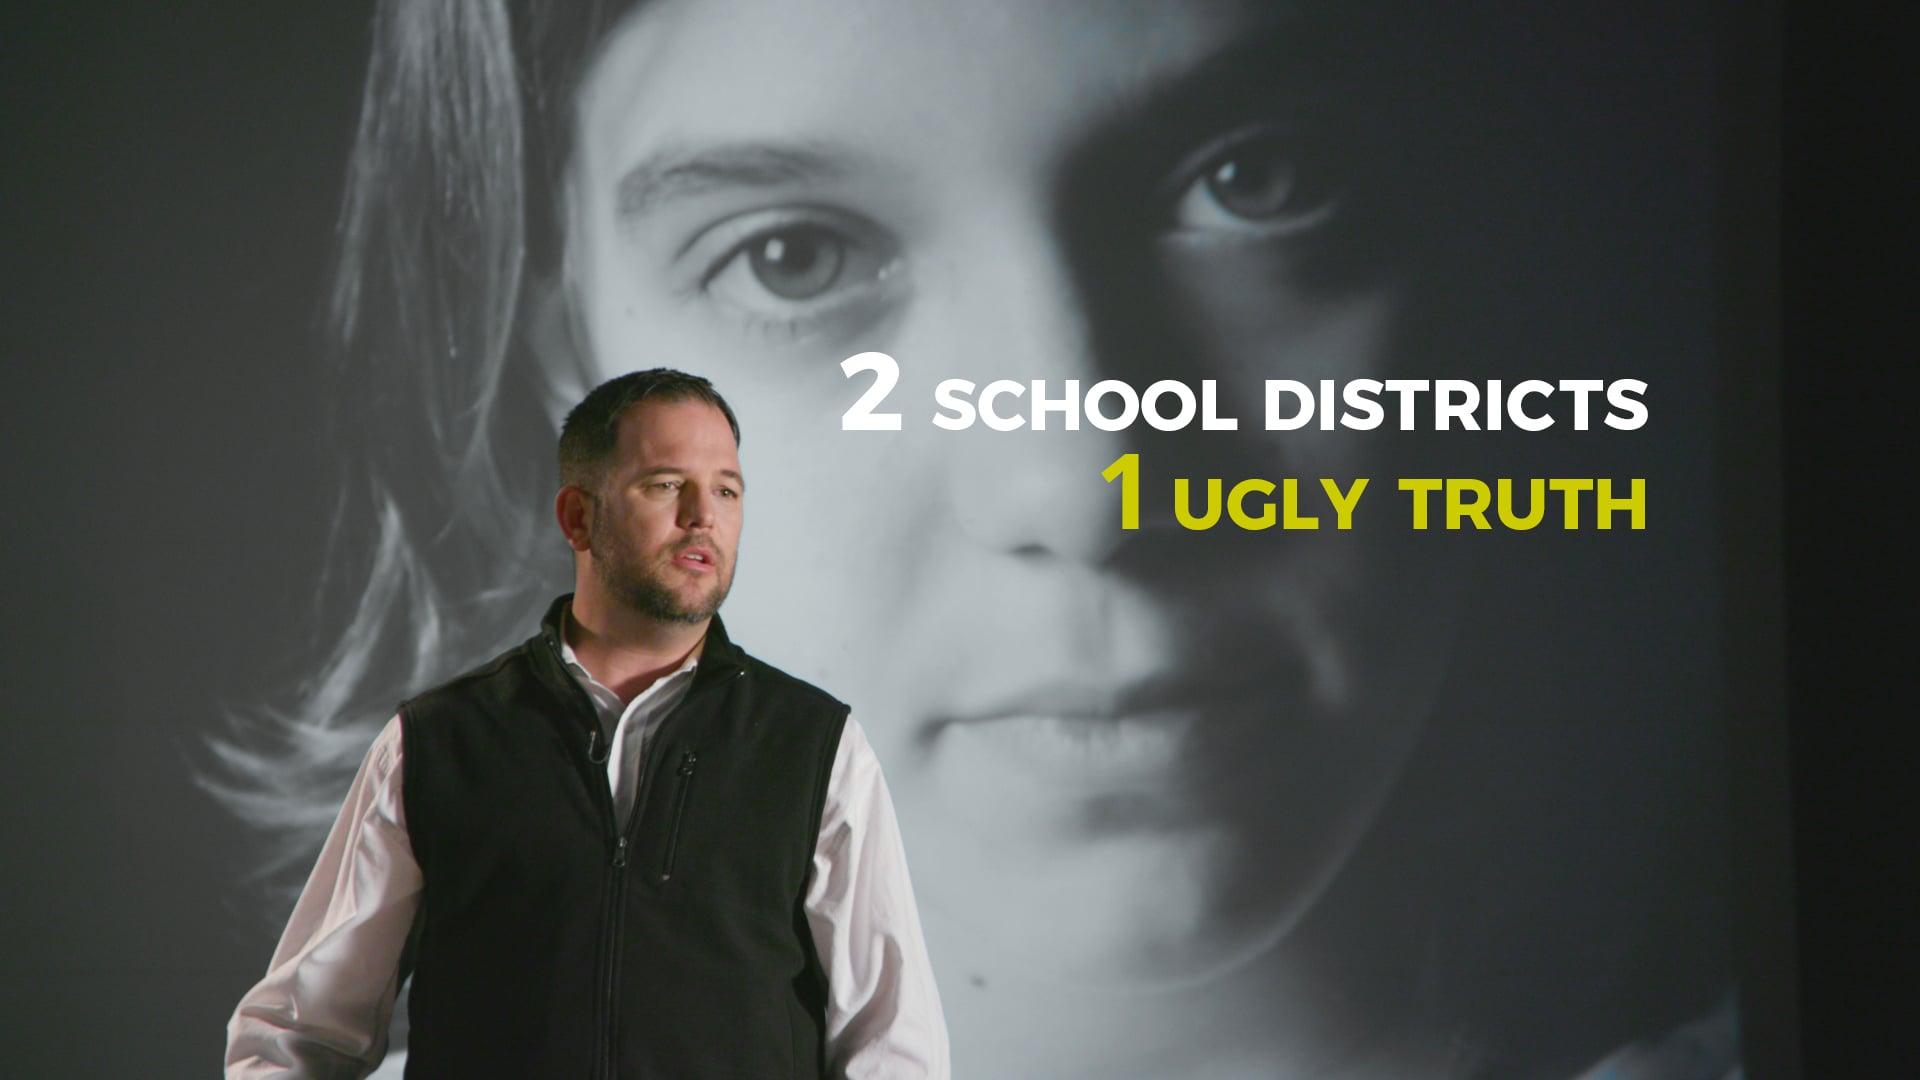 John Kuhn | 2 School Districts, 1 Ugly Truth